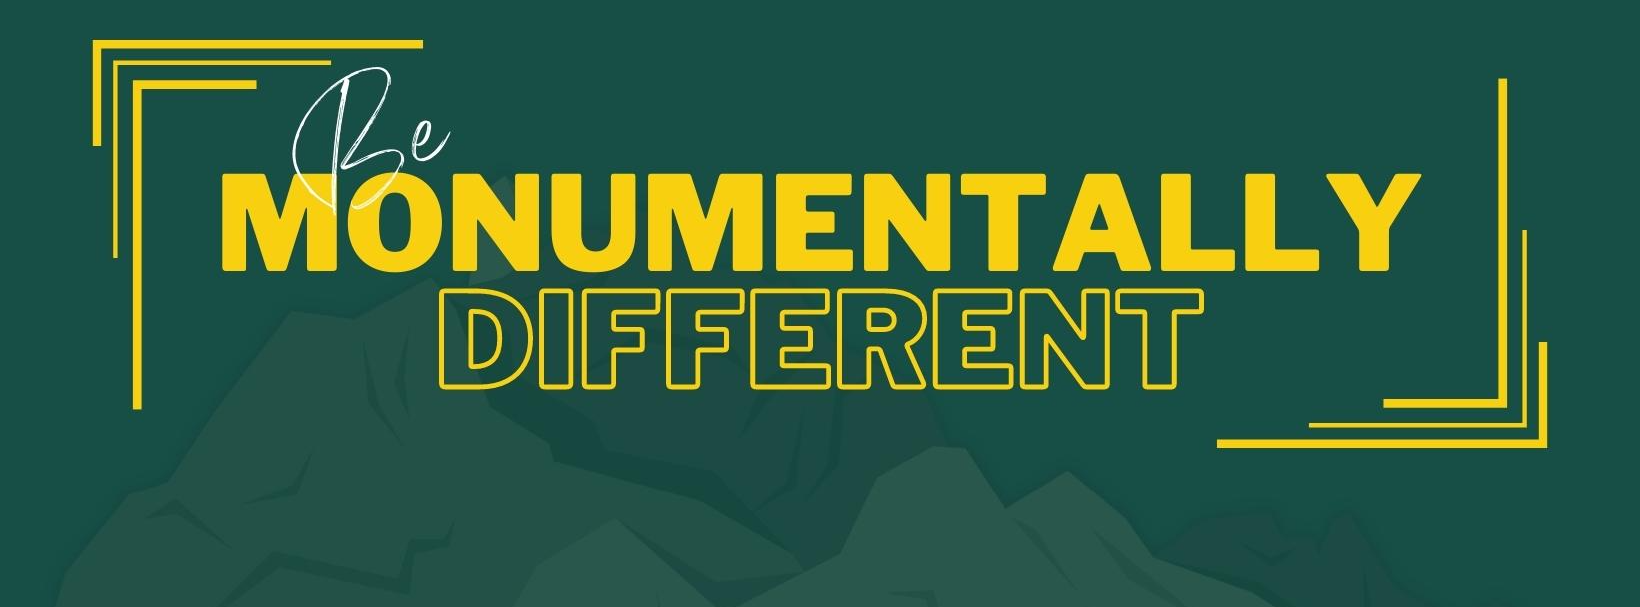 Be Monumentally Different